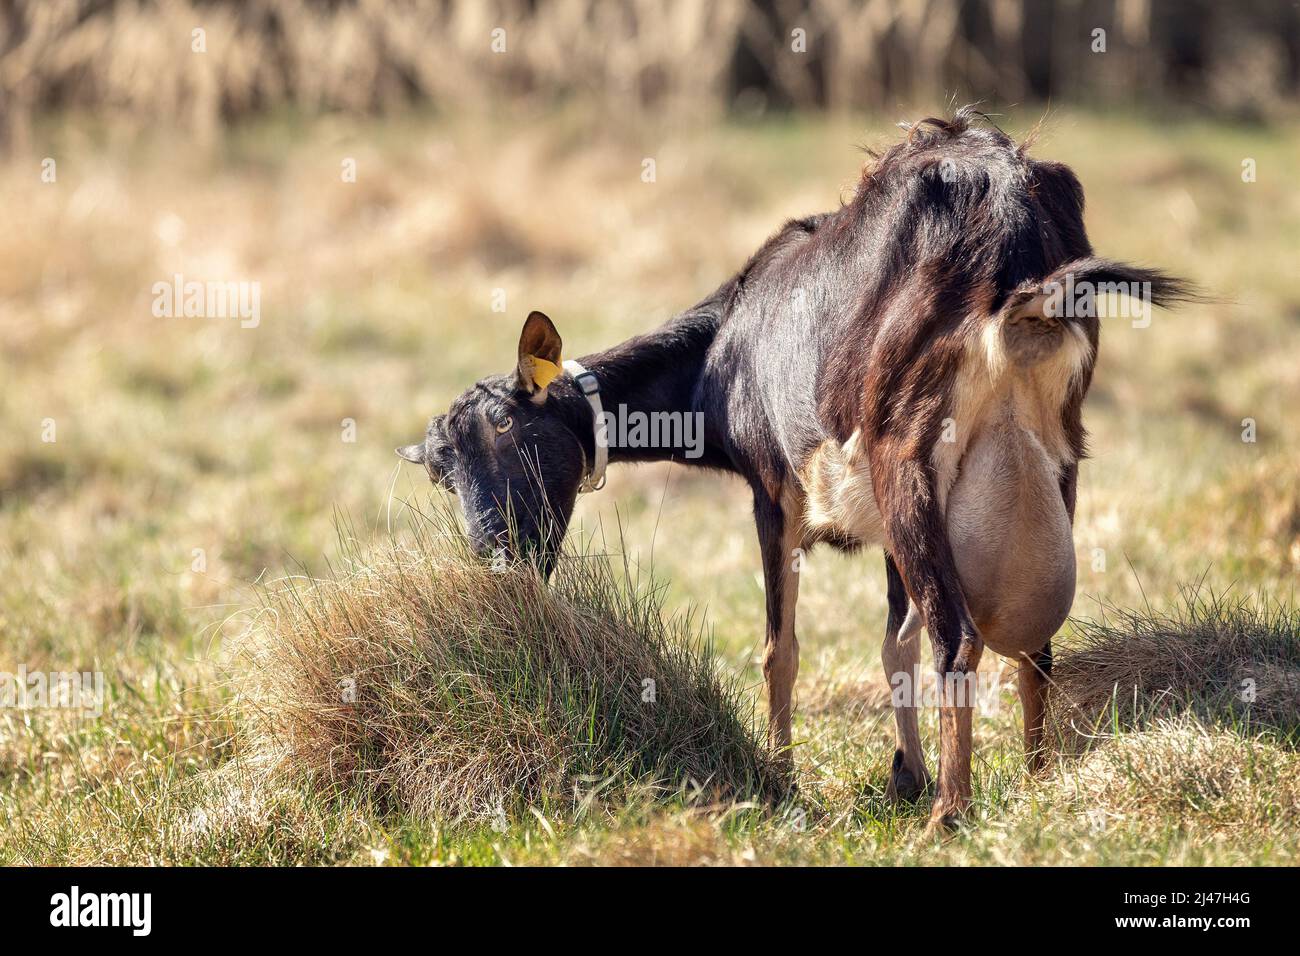 A long-haired dark brown goat with one horn and a large udder. Free-range goat grazing on a small rural organic dairy farm. Stock Photo